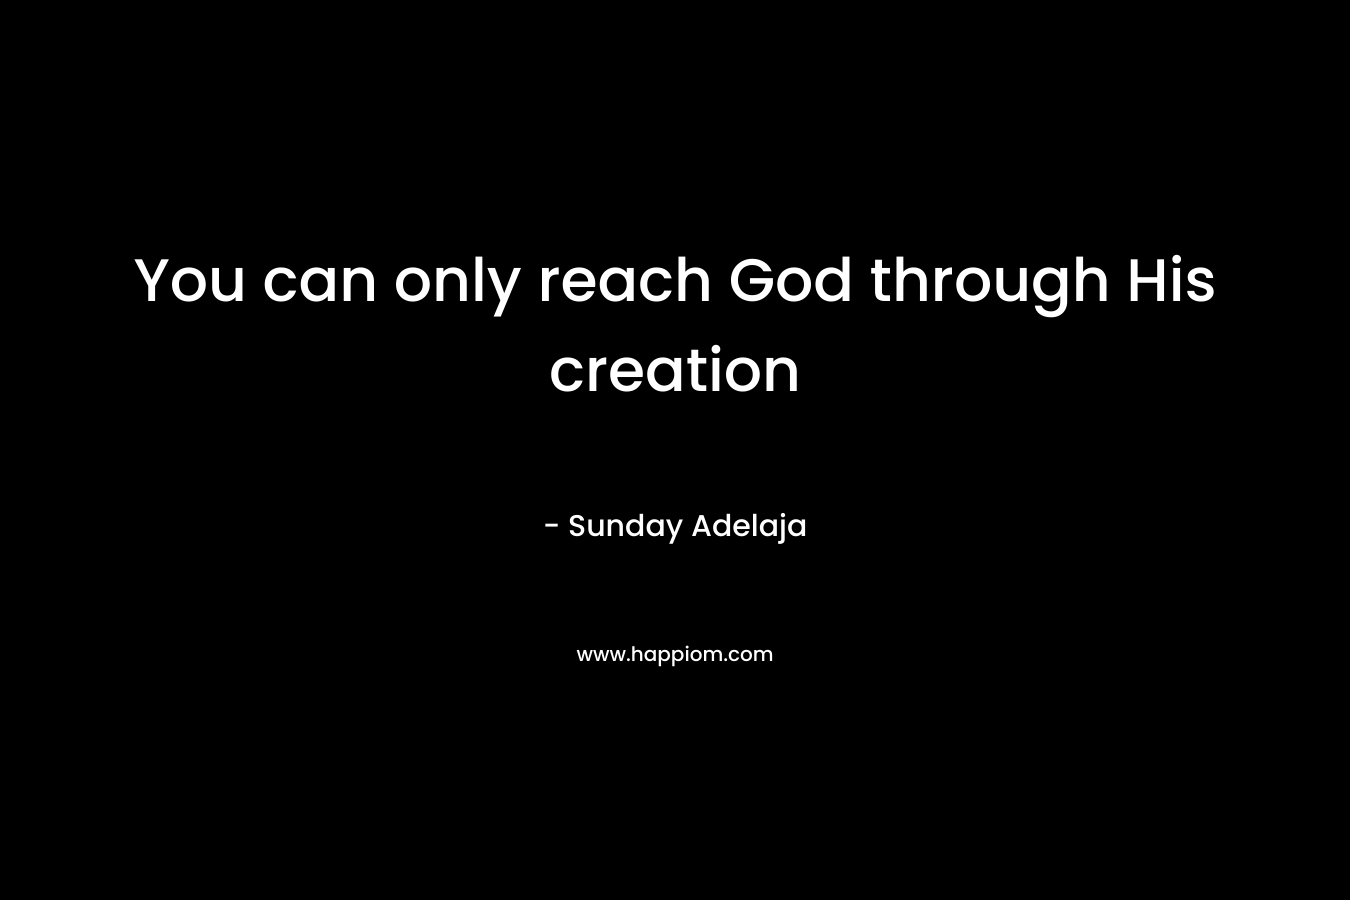 You can only reach God through His creation